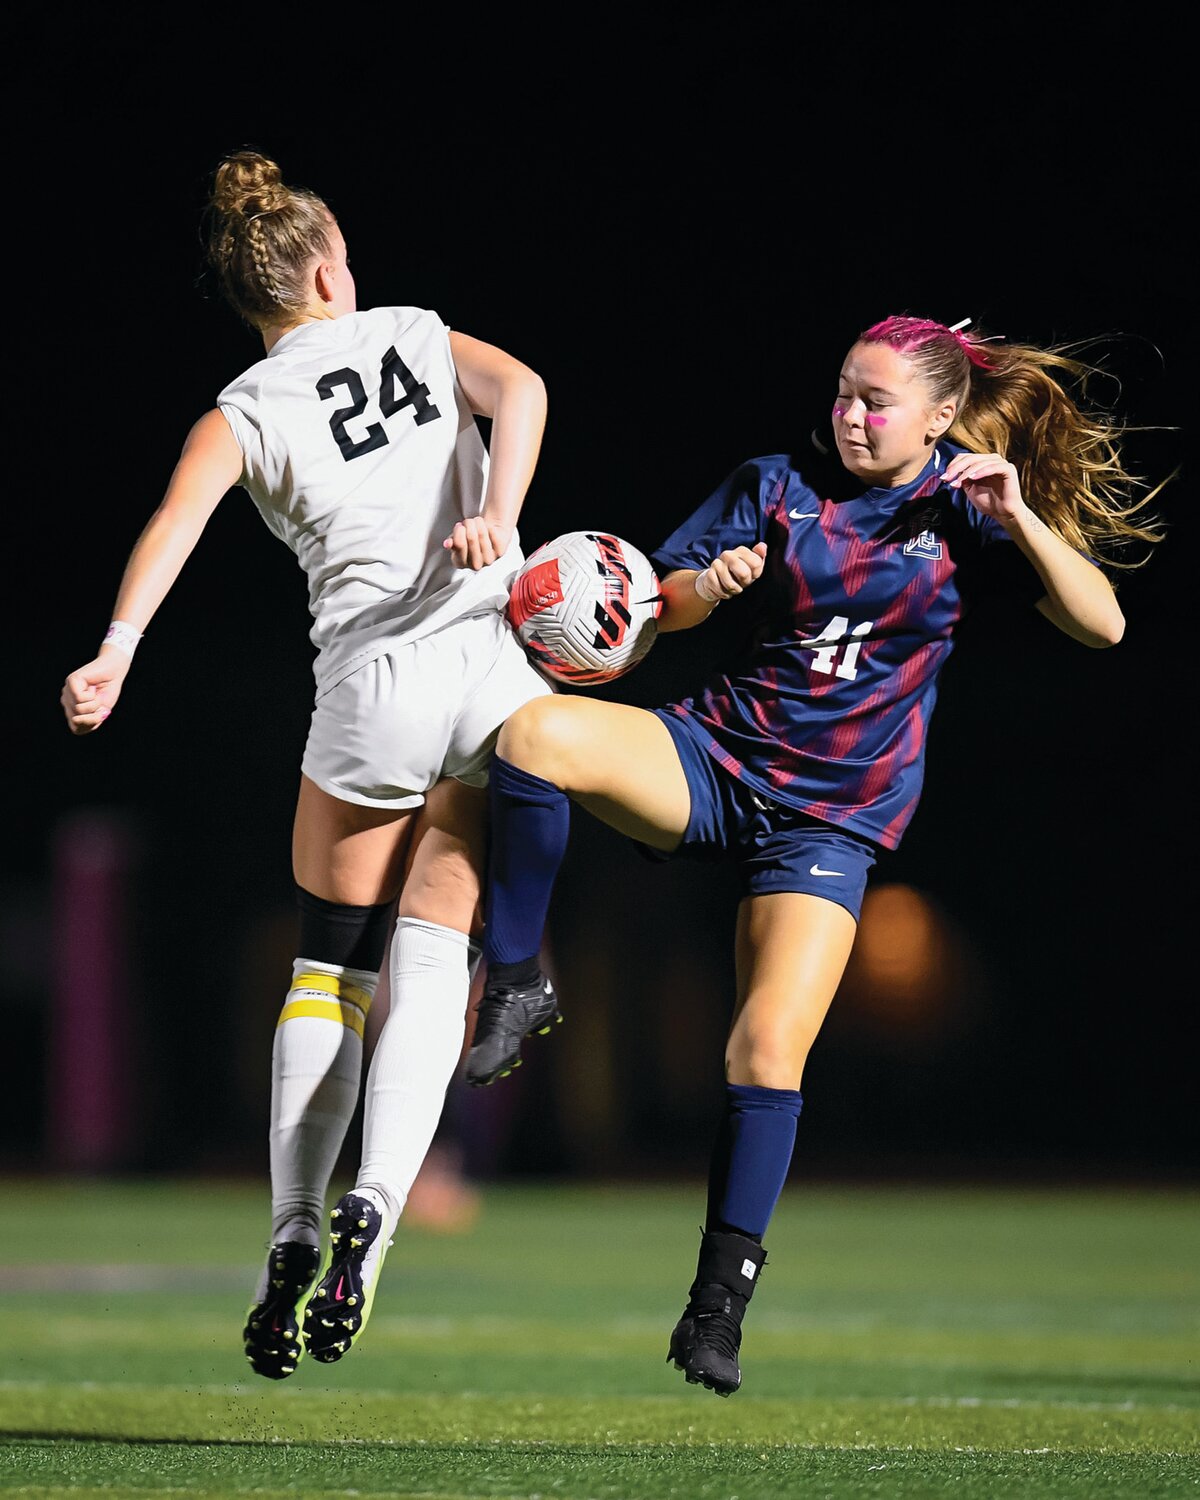 CB East’s Madelyn Hill gets in front of CB West’s Janelle Blokker to intercept a pass during the second half.